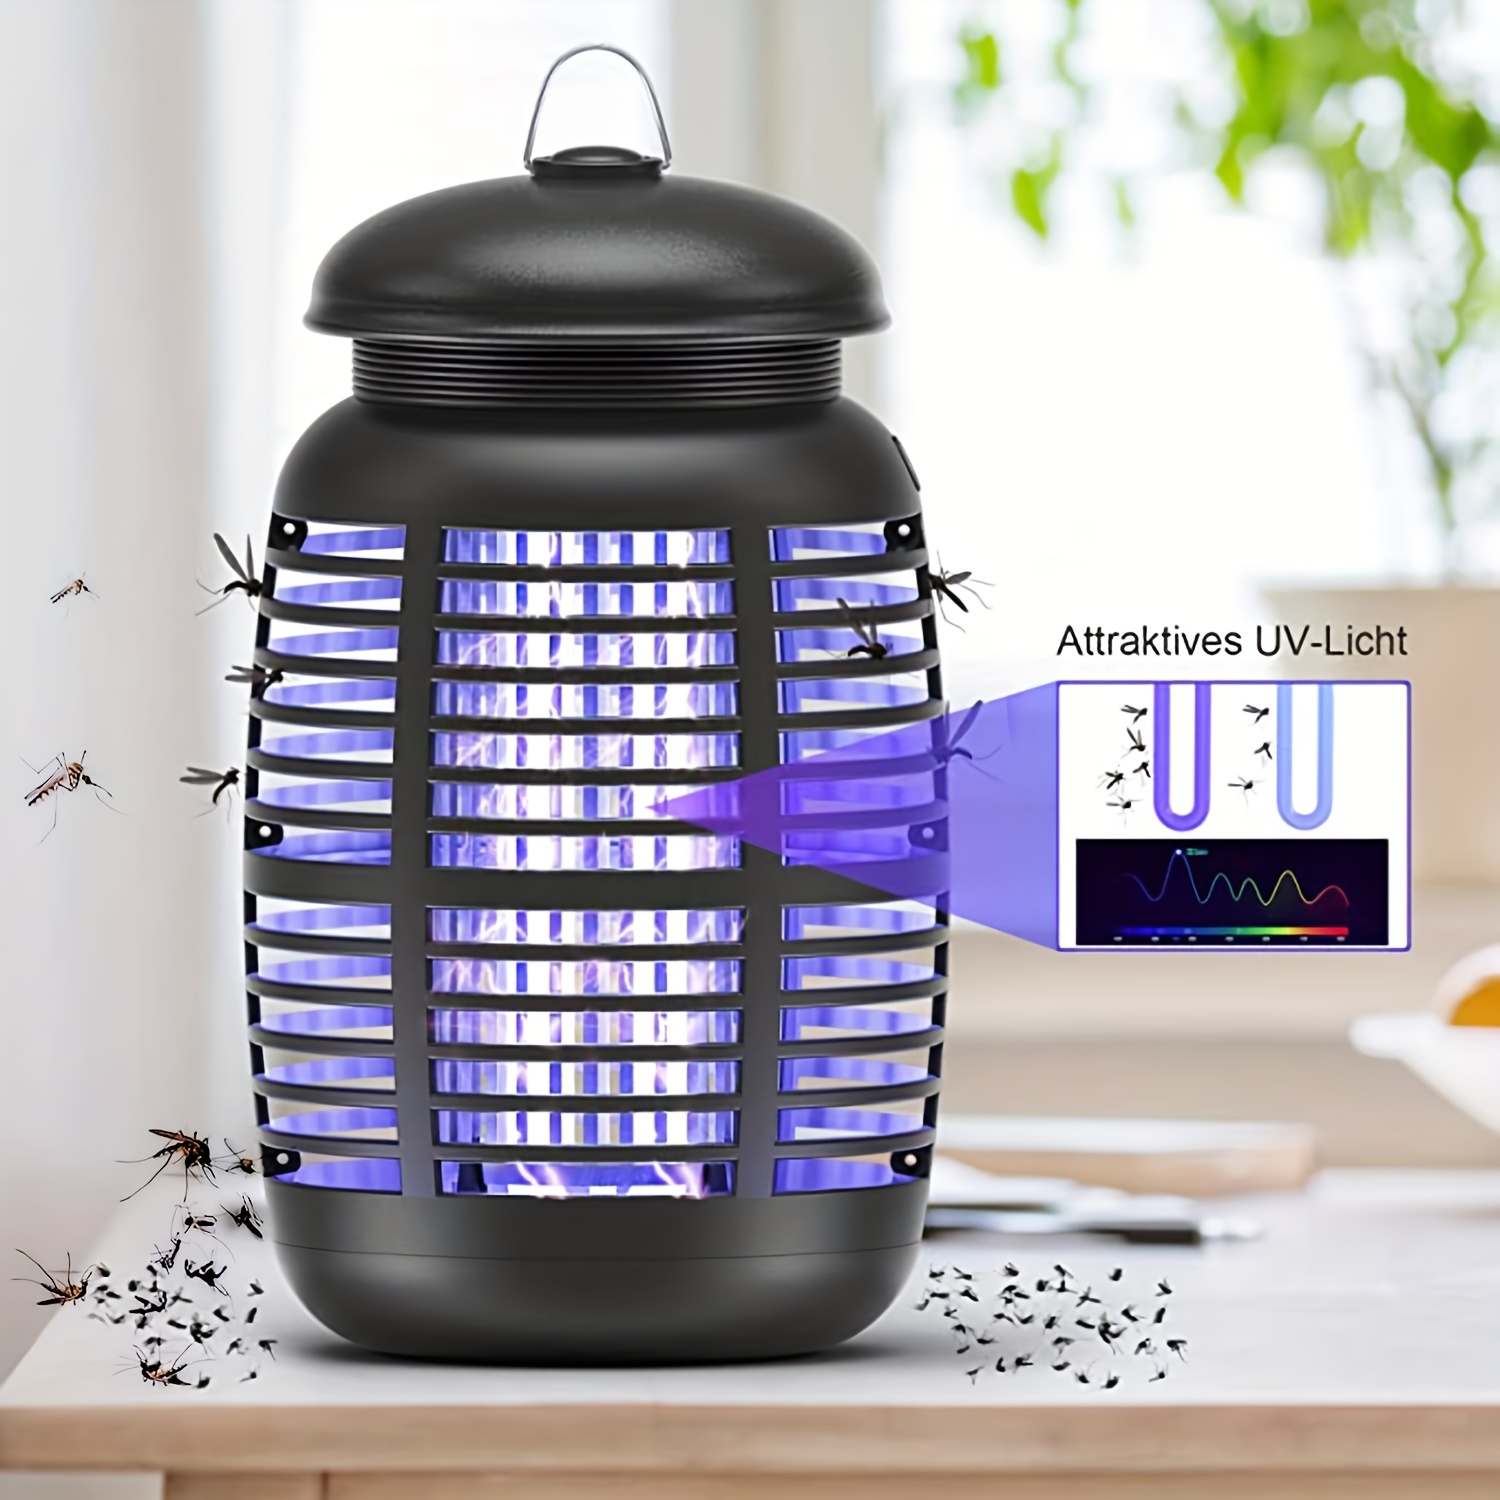 Outdoor Solar Powered Insect Mosquito Killer Lamp with Stand